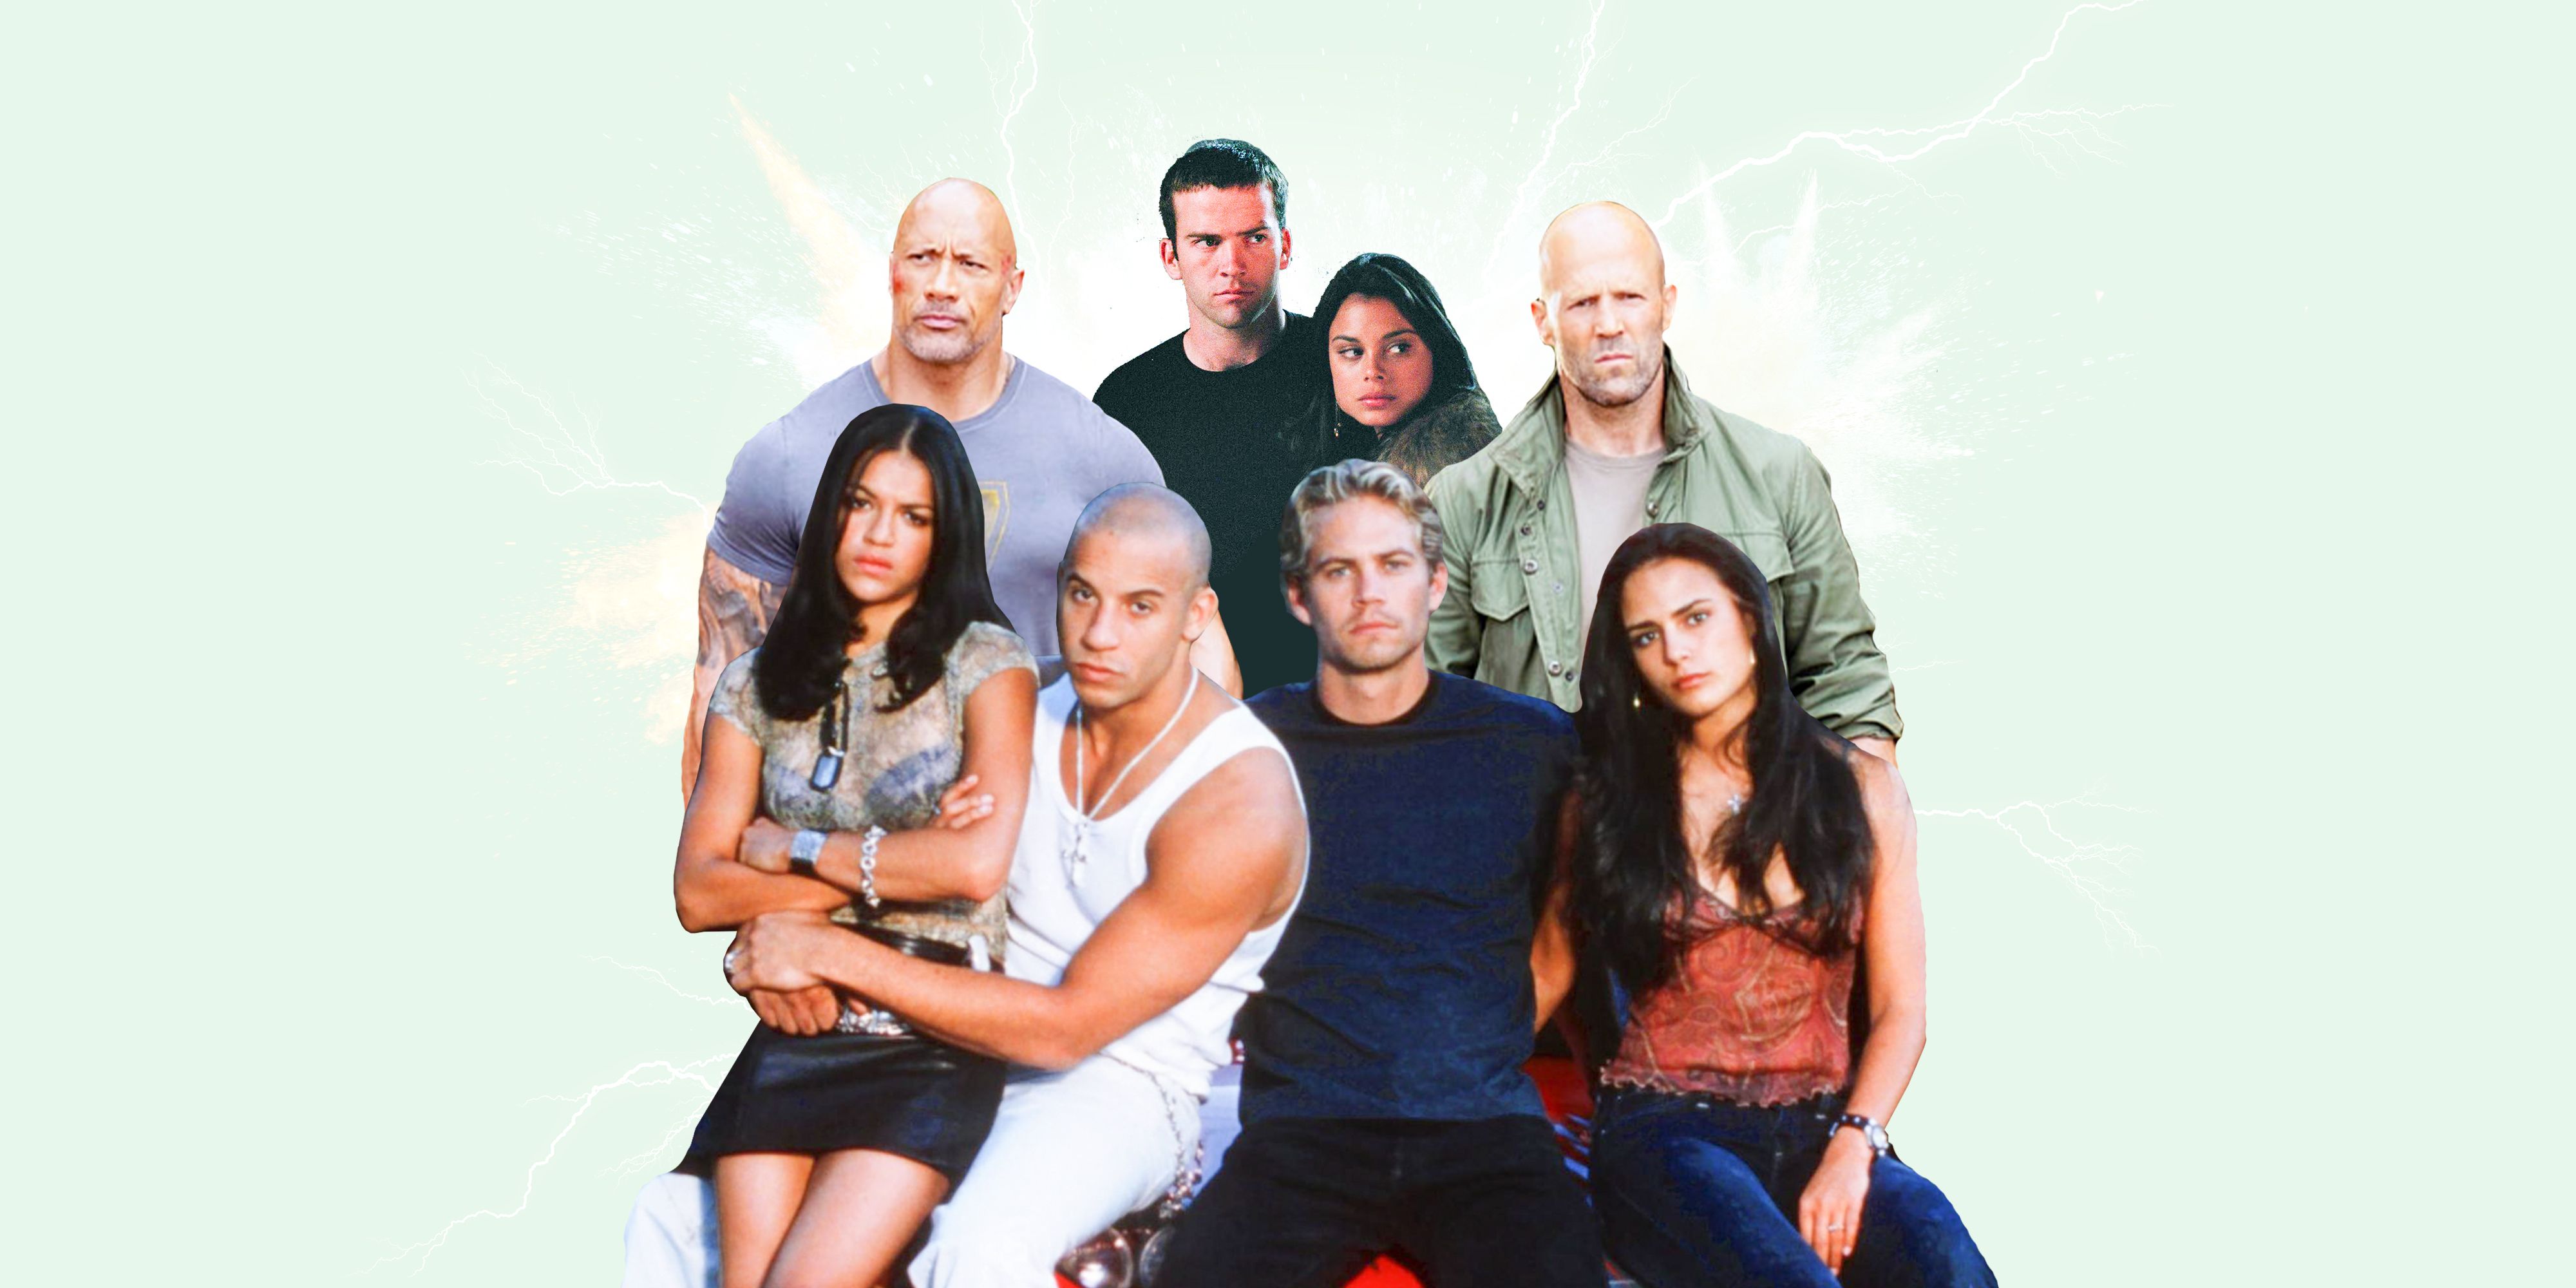 20 Fast and Furious Facts About the Fast Saga